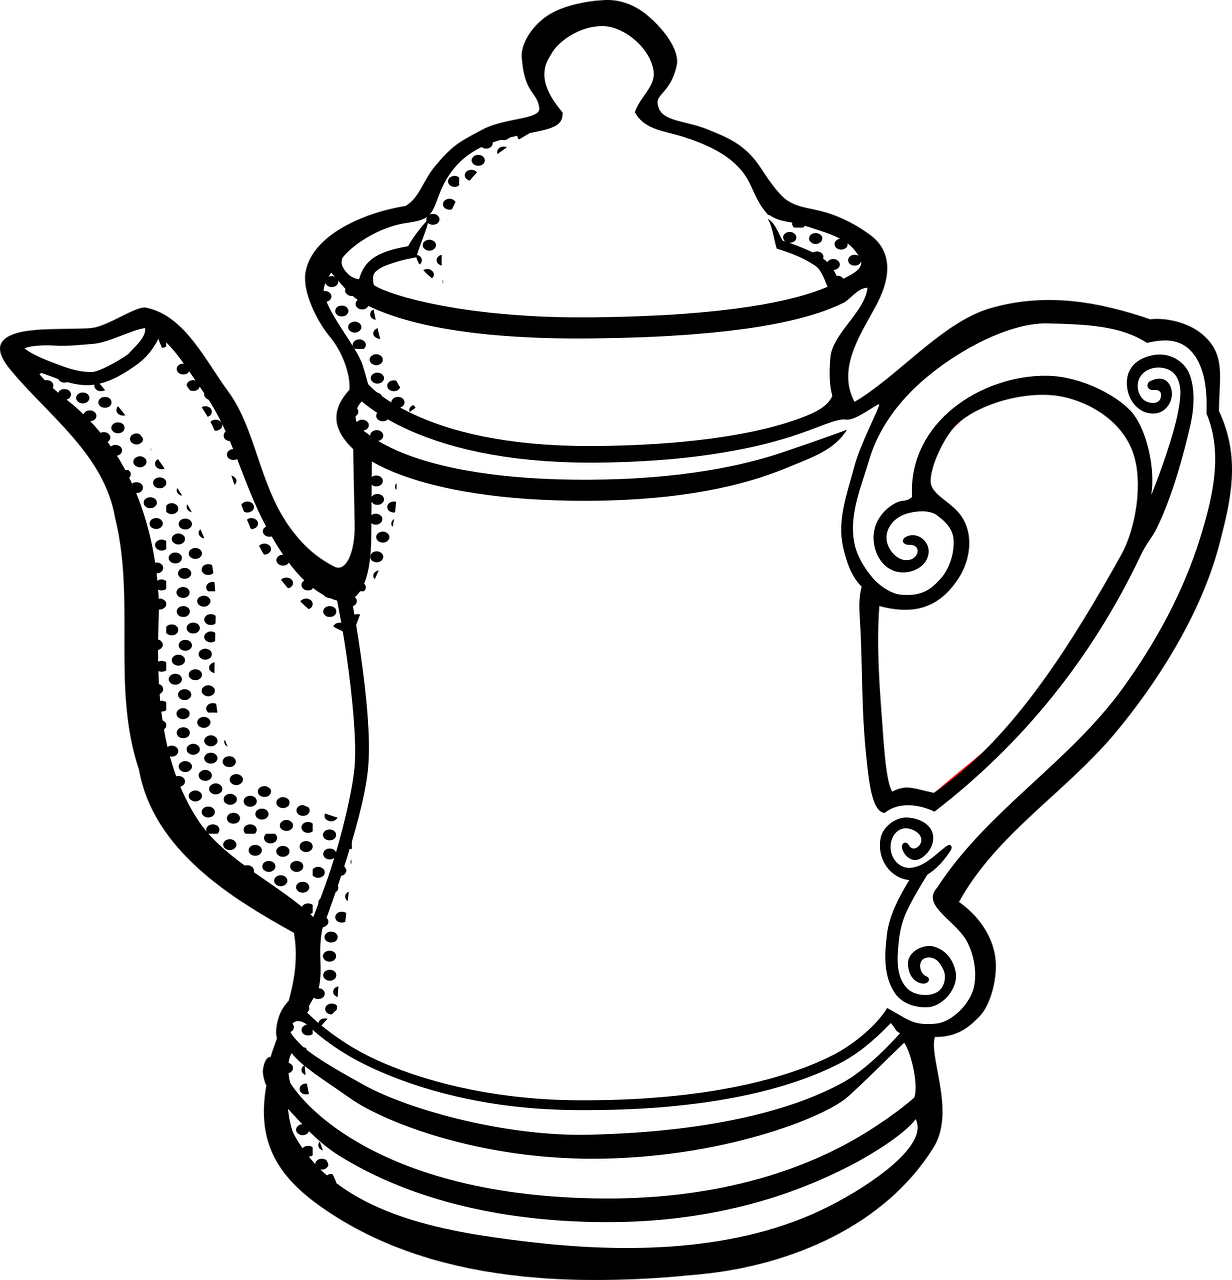 a white tea kettle that is not empty